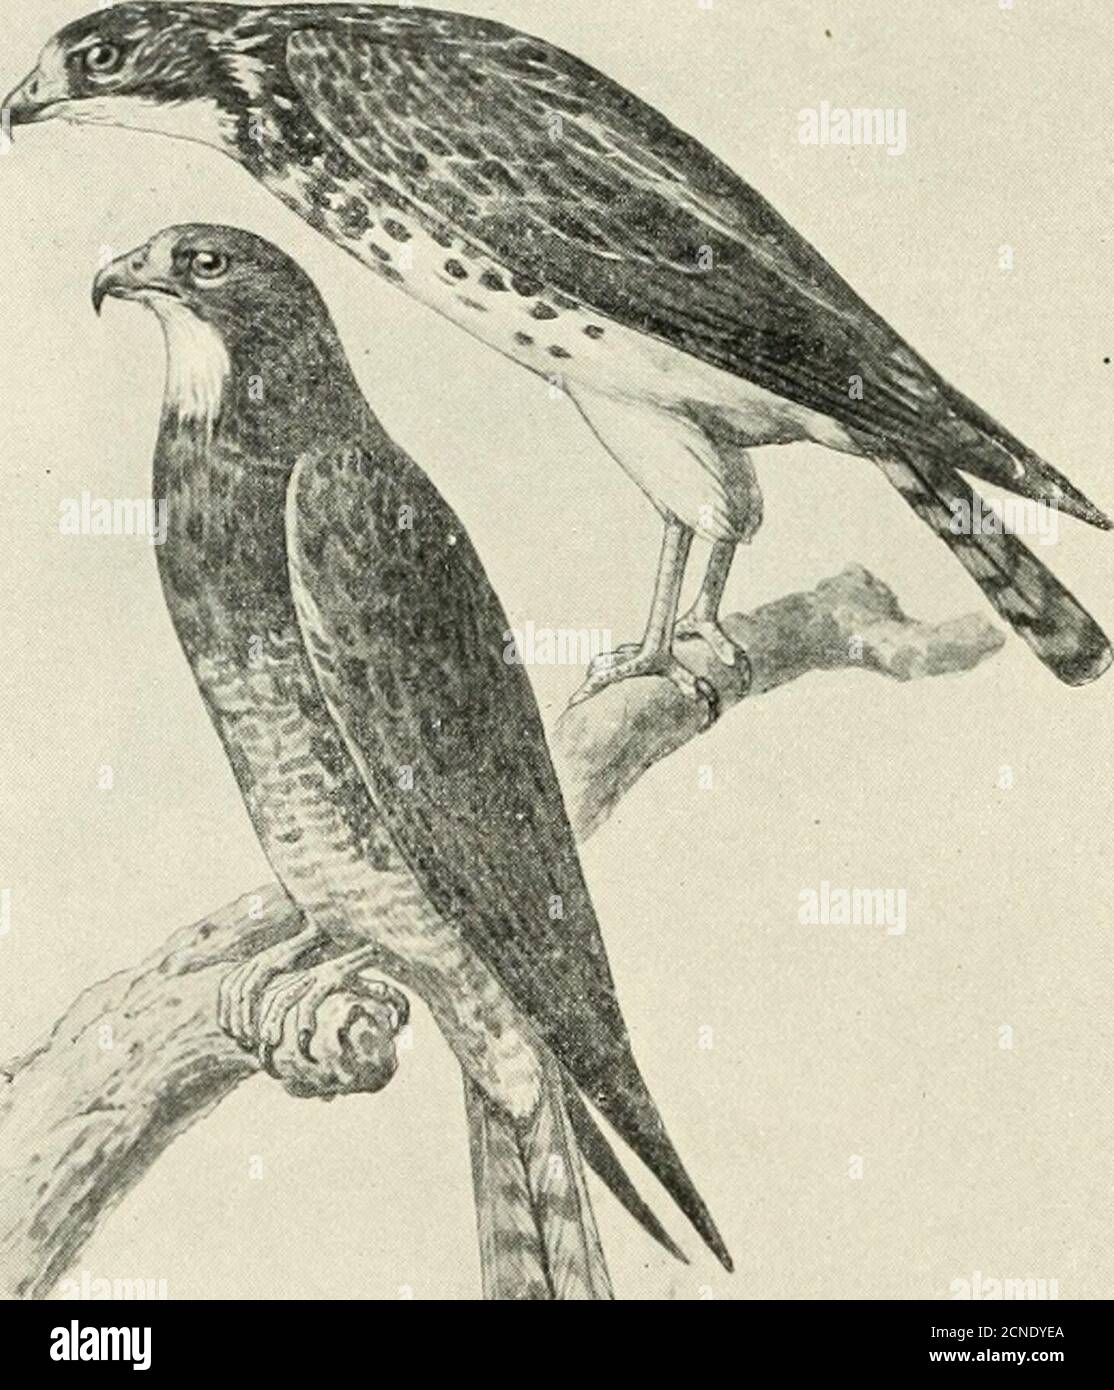 . The birds of Illinois and Wisconsin . , 19.50 to 22.50; wing, 12 to 14.25; tail, 8.25 to9.25; tarsus, 3.00 to 3.25. The Red-shouldered Hawk is a common summer resident in Illinoisand not uncommon in Wisconsin. The immature birds somewhatresemble those of B. borealis, but besides other differences they aresmaller and the tarsus more slender and less feathered than in thatspecies. Usually nests in a large tree. The eggs are 3 to 5, rarely six,dull white, spotted and marked various shades of brown. Theymeasure about 2.10 x 1.70 inches. Incubation usually commences inlate April or May in this la Stock Photo